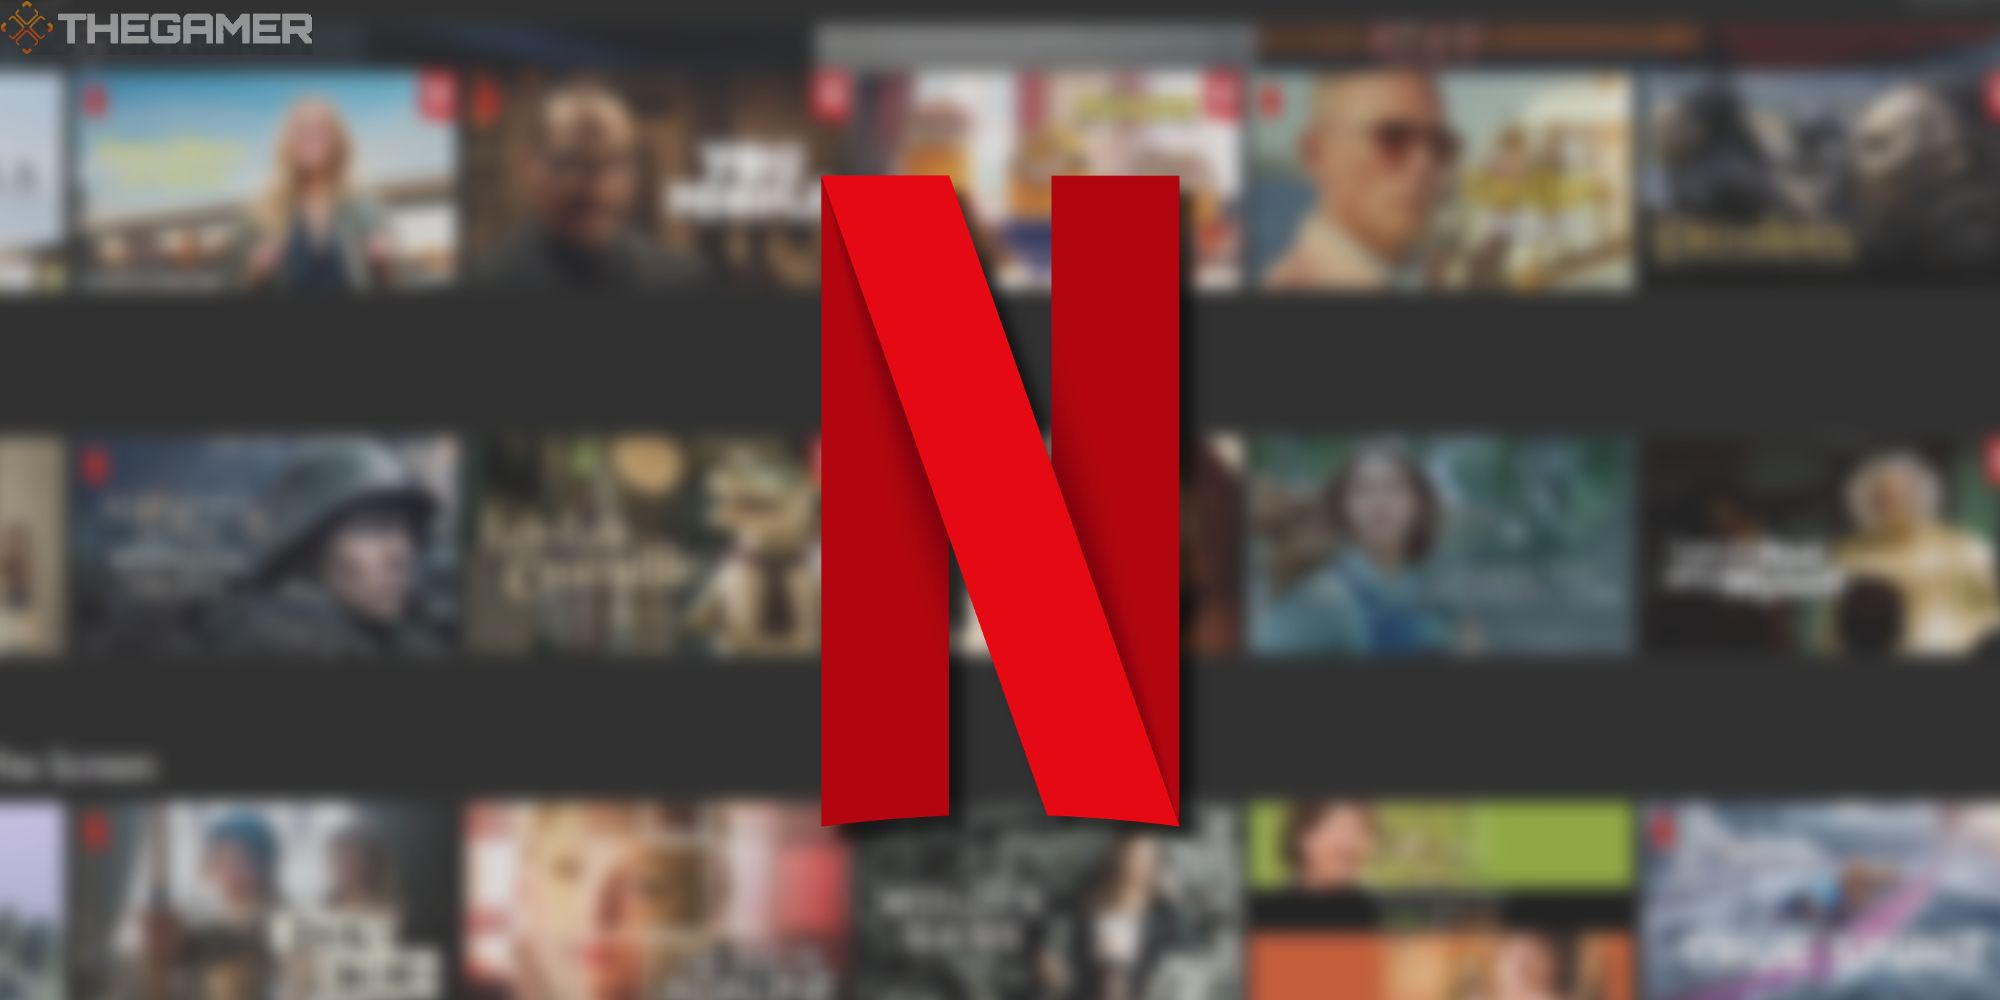 blurred netflix selection screen with N logo on top